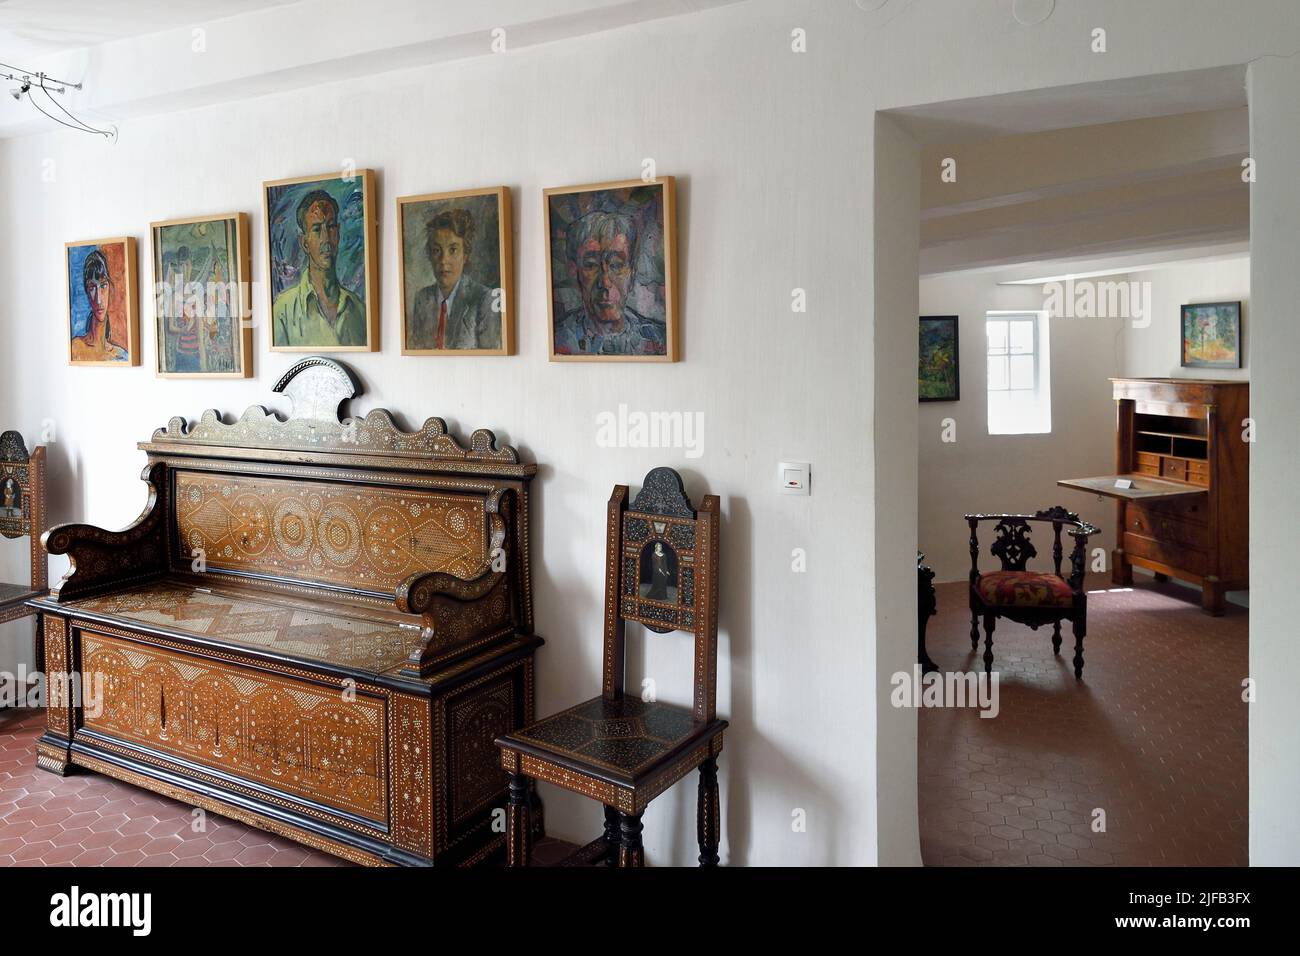 France, Var, Seillans, labelled Les Plus Beaux Villages de France (The Most Beautiful Villages of France), Maison Waldberg contains the donations of Max Ernst, Dorothea Tanning and Stan Appenzeller, Stan Appenzeller paintings on the wall Stock Photo